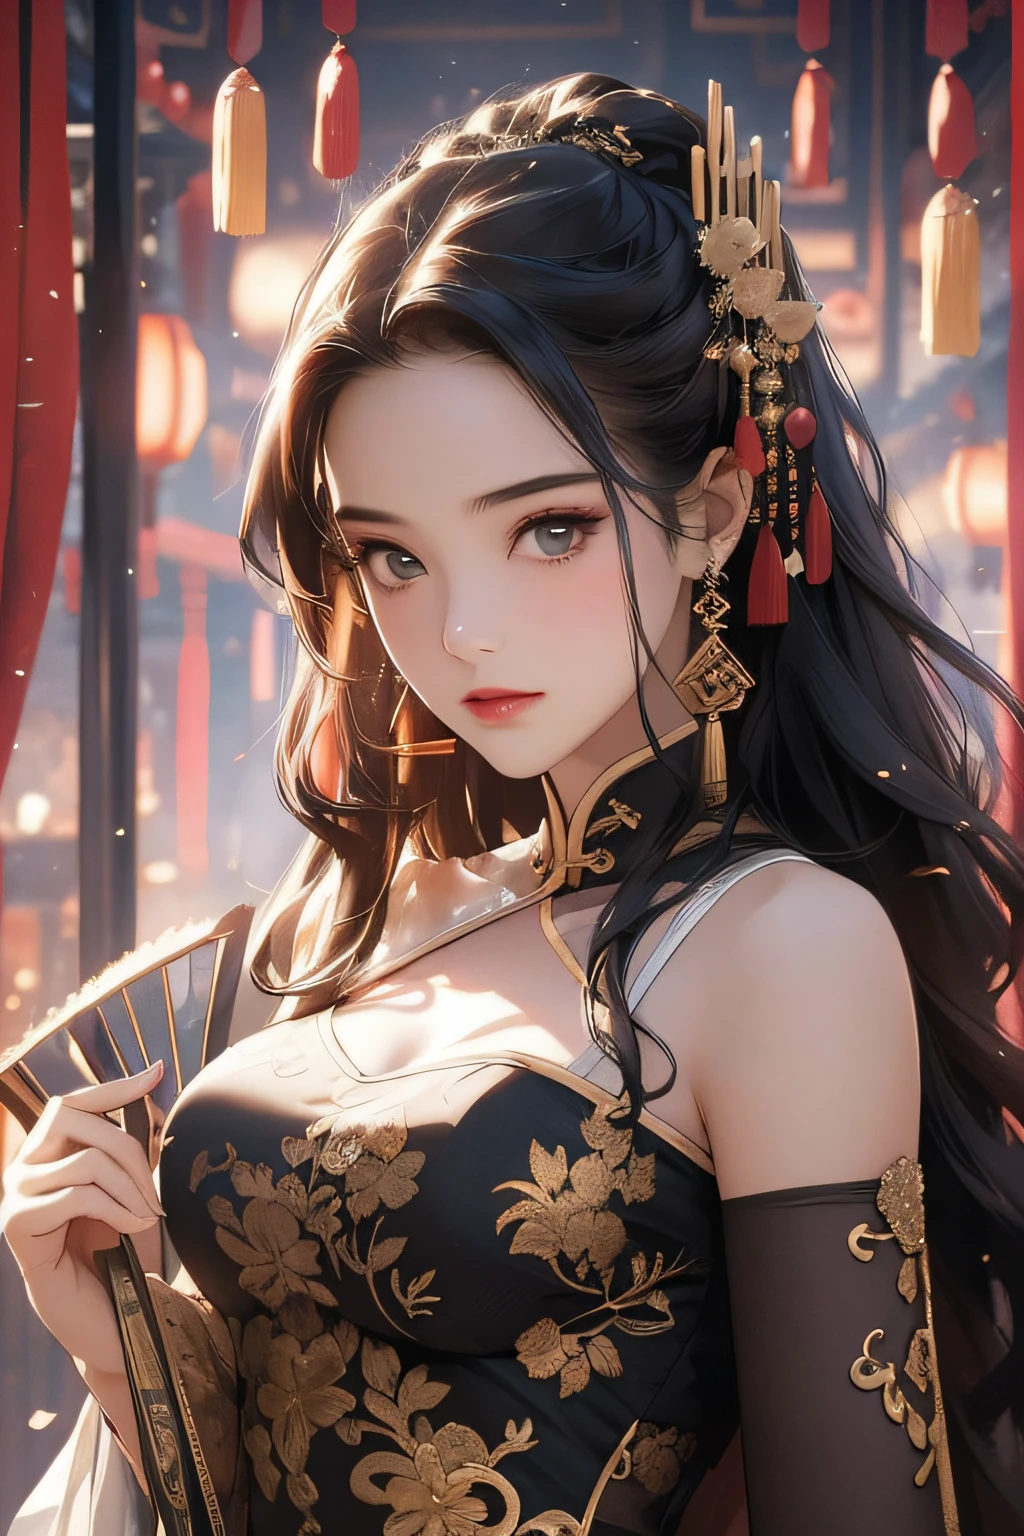 ((Best Quality)), ((Ultra High Resolution)), ((Realistic)), Fine Details, Age 19 on Appearance, Black Hair, Perfect Face Shape, Moderate Makeup:1.5, Face Lighting, Accentuating Details, Long Hair, Wearing Chinese Wedding Dress, Gold Headgear Decoration, Holding a Fan, Red Wedding Dress Extra Points: 1.3, Gold Dress Details. Full body portraits, windows, beds, curtains, candlelight, present a picture of a long-range pose.